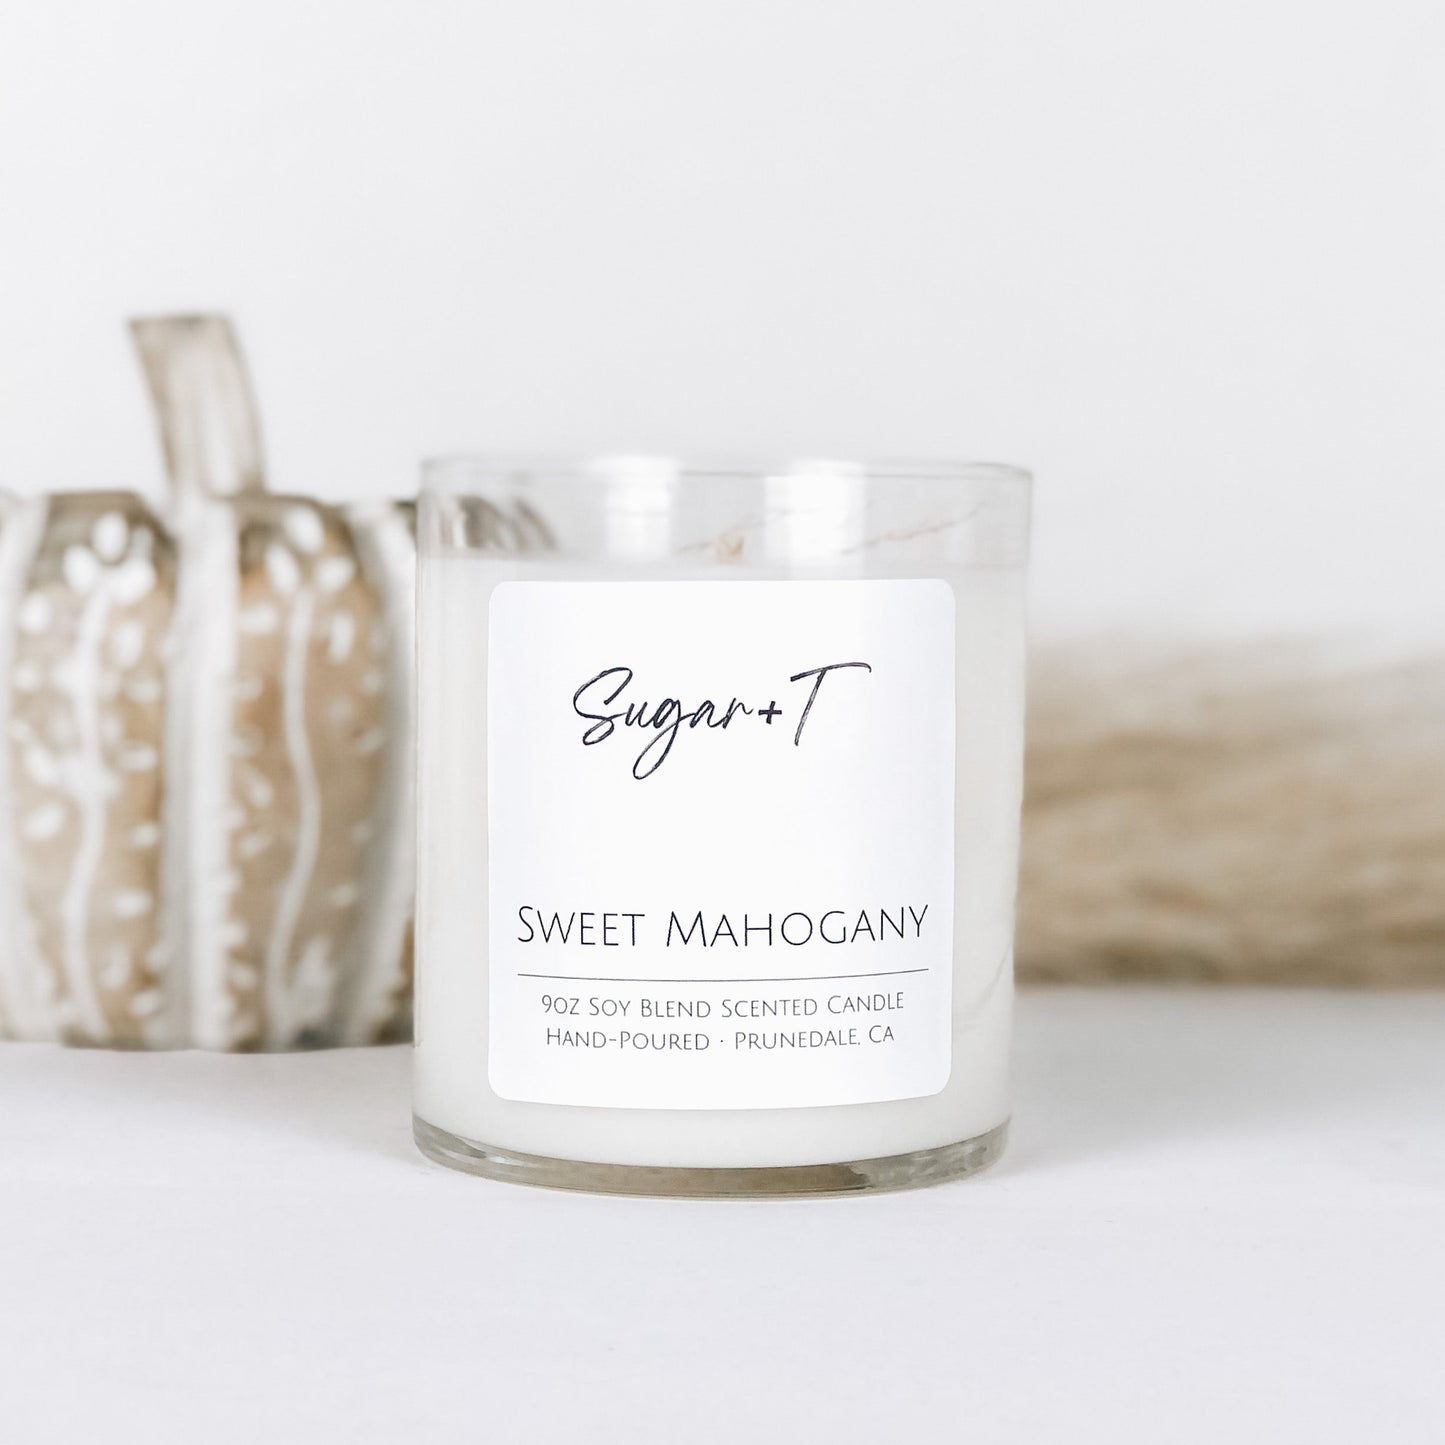 Sweet Mahogany Scented Candle